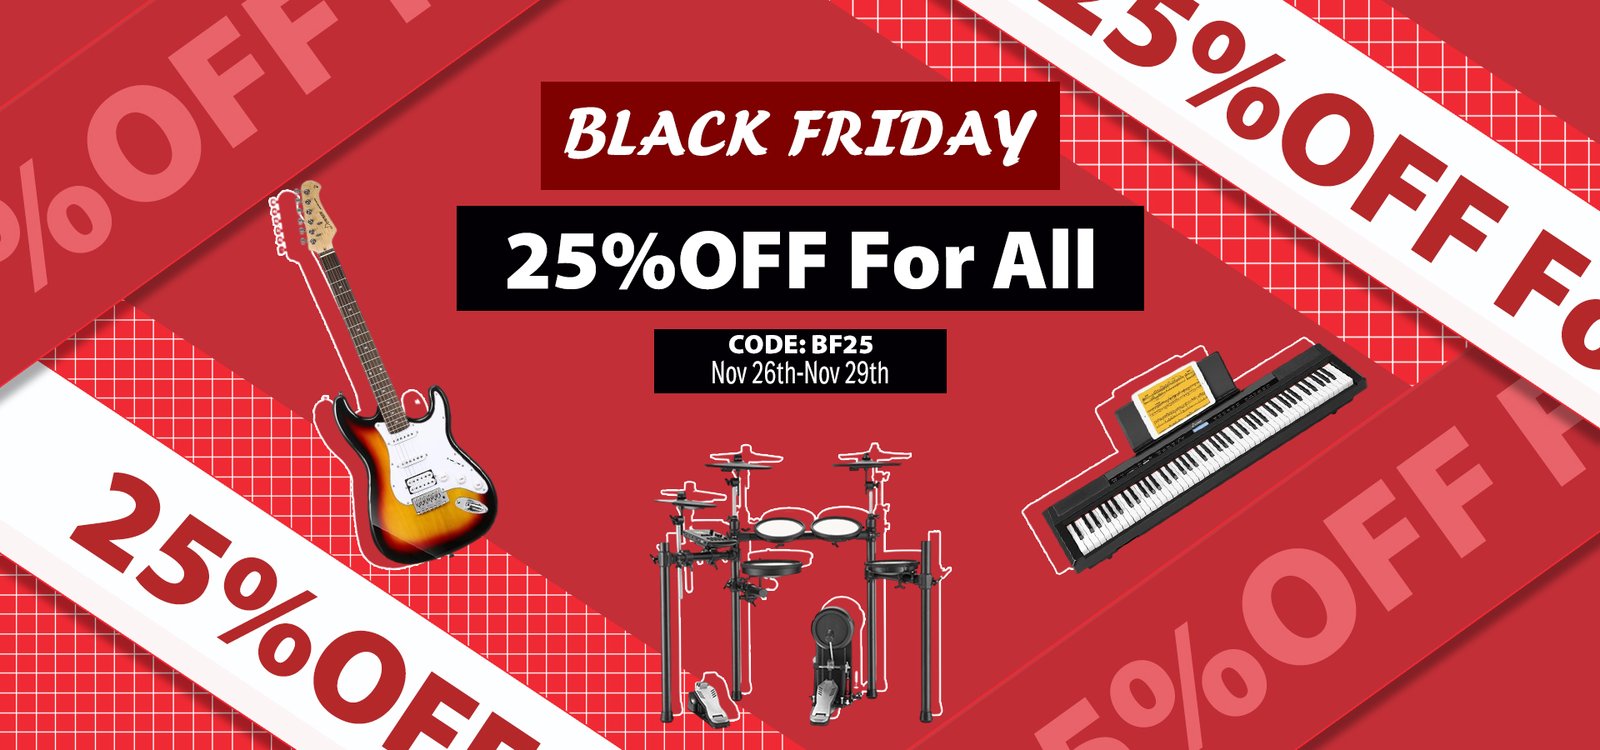 Donner Music Black Friday extra 25% OFF sitewide with coupon including guitars, drums & more